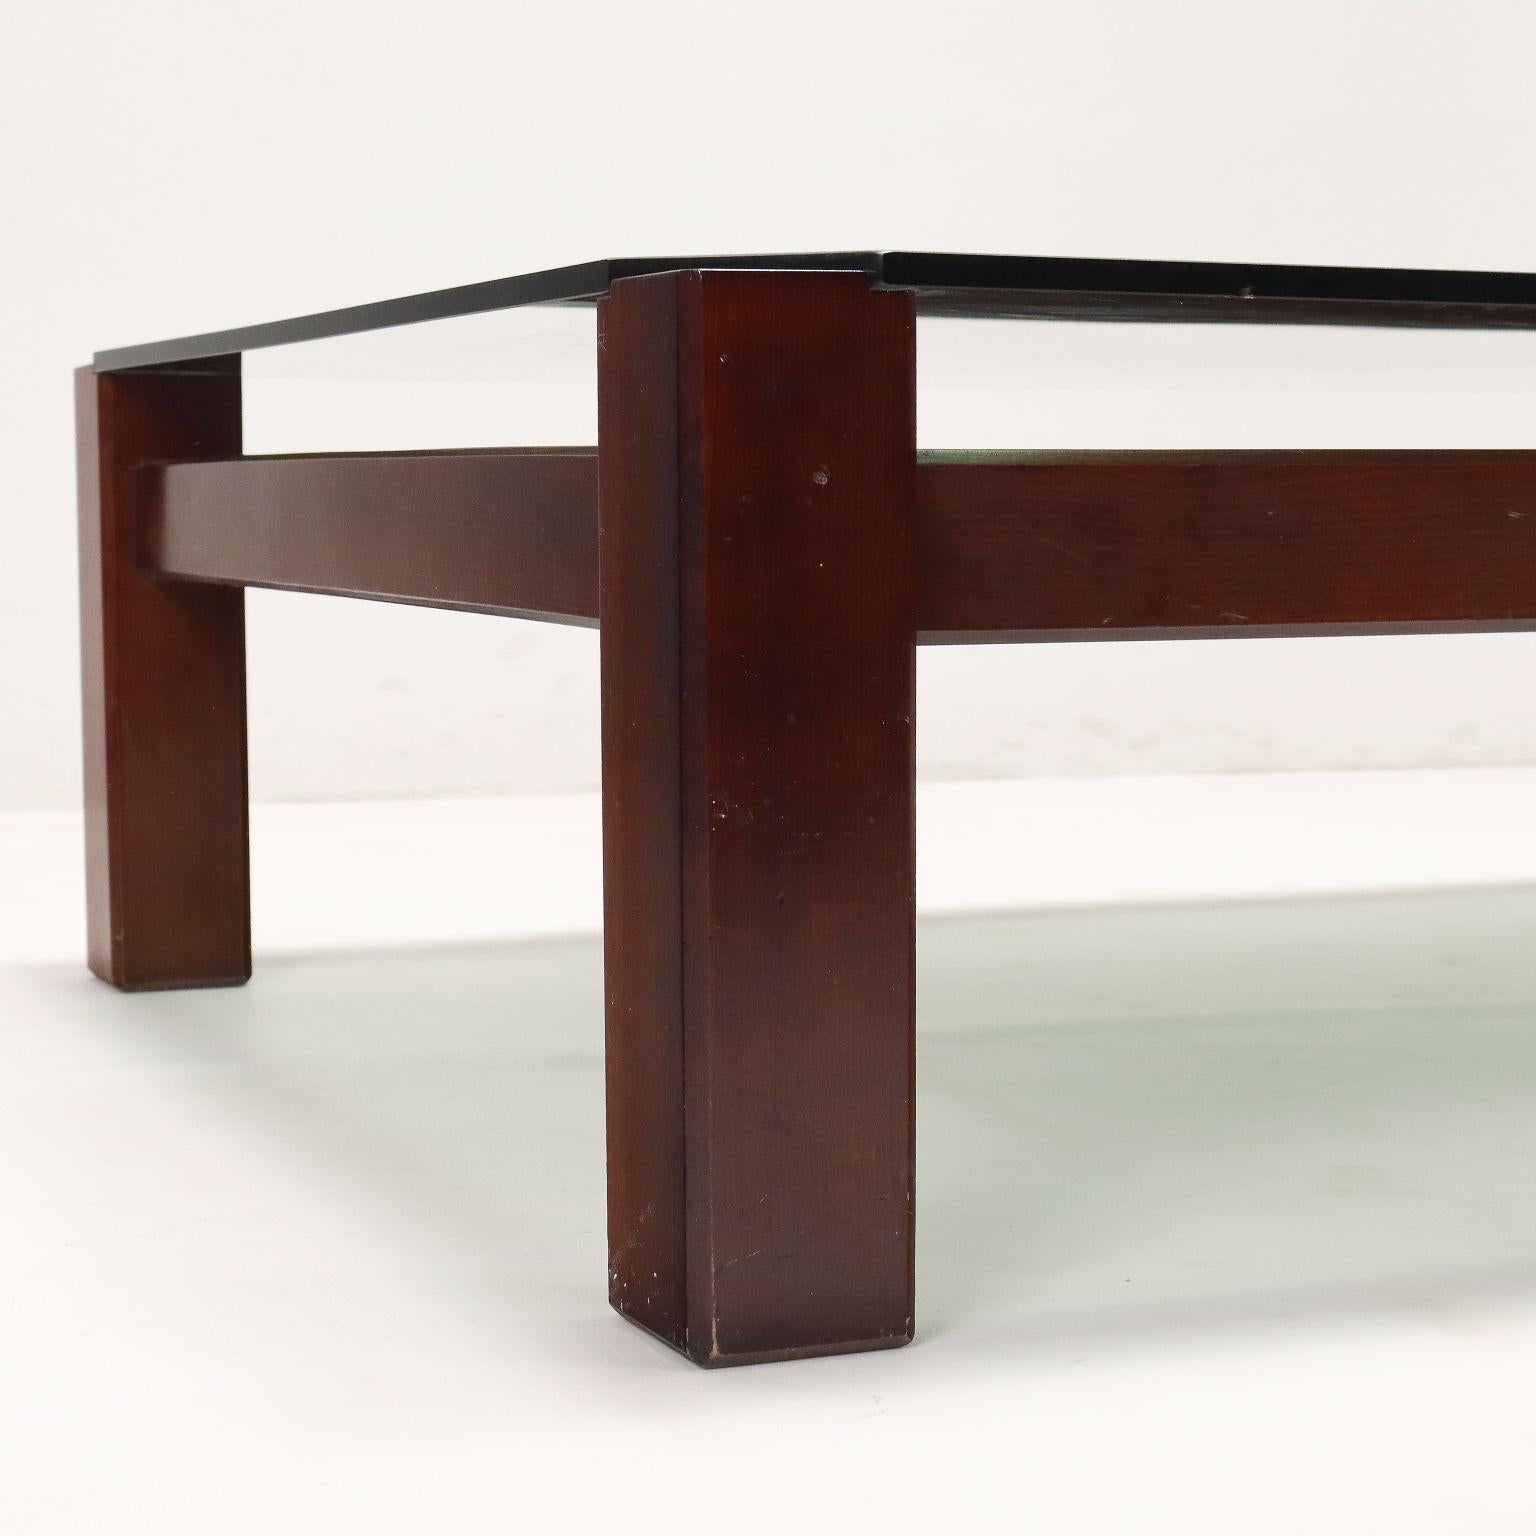 70s-80s coffee table with glass top In Good Condition For Sale In Milano, IT